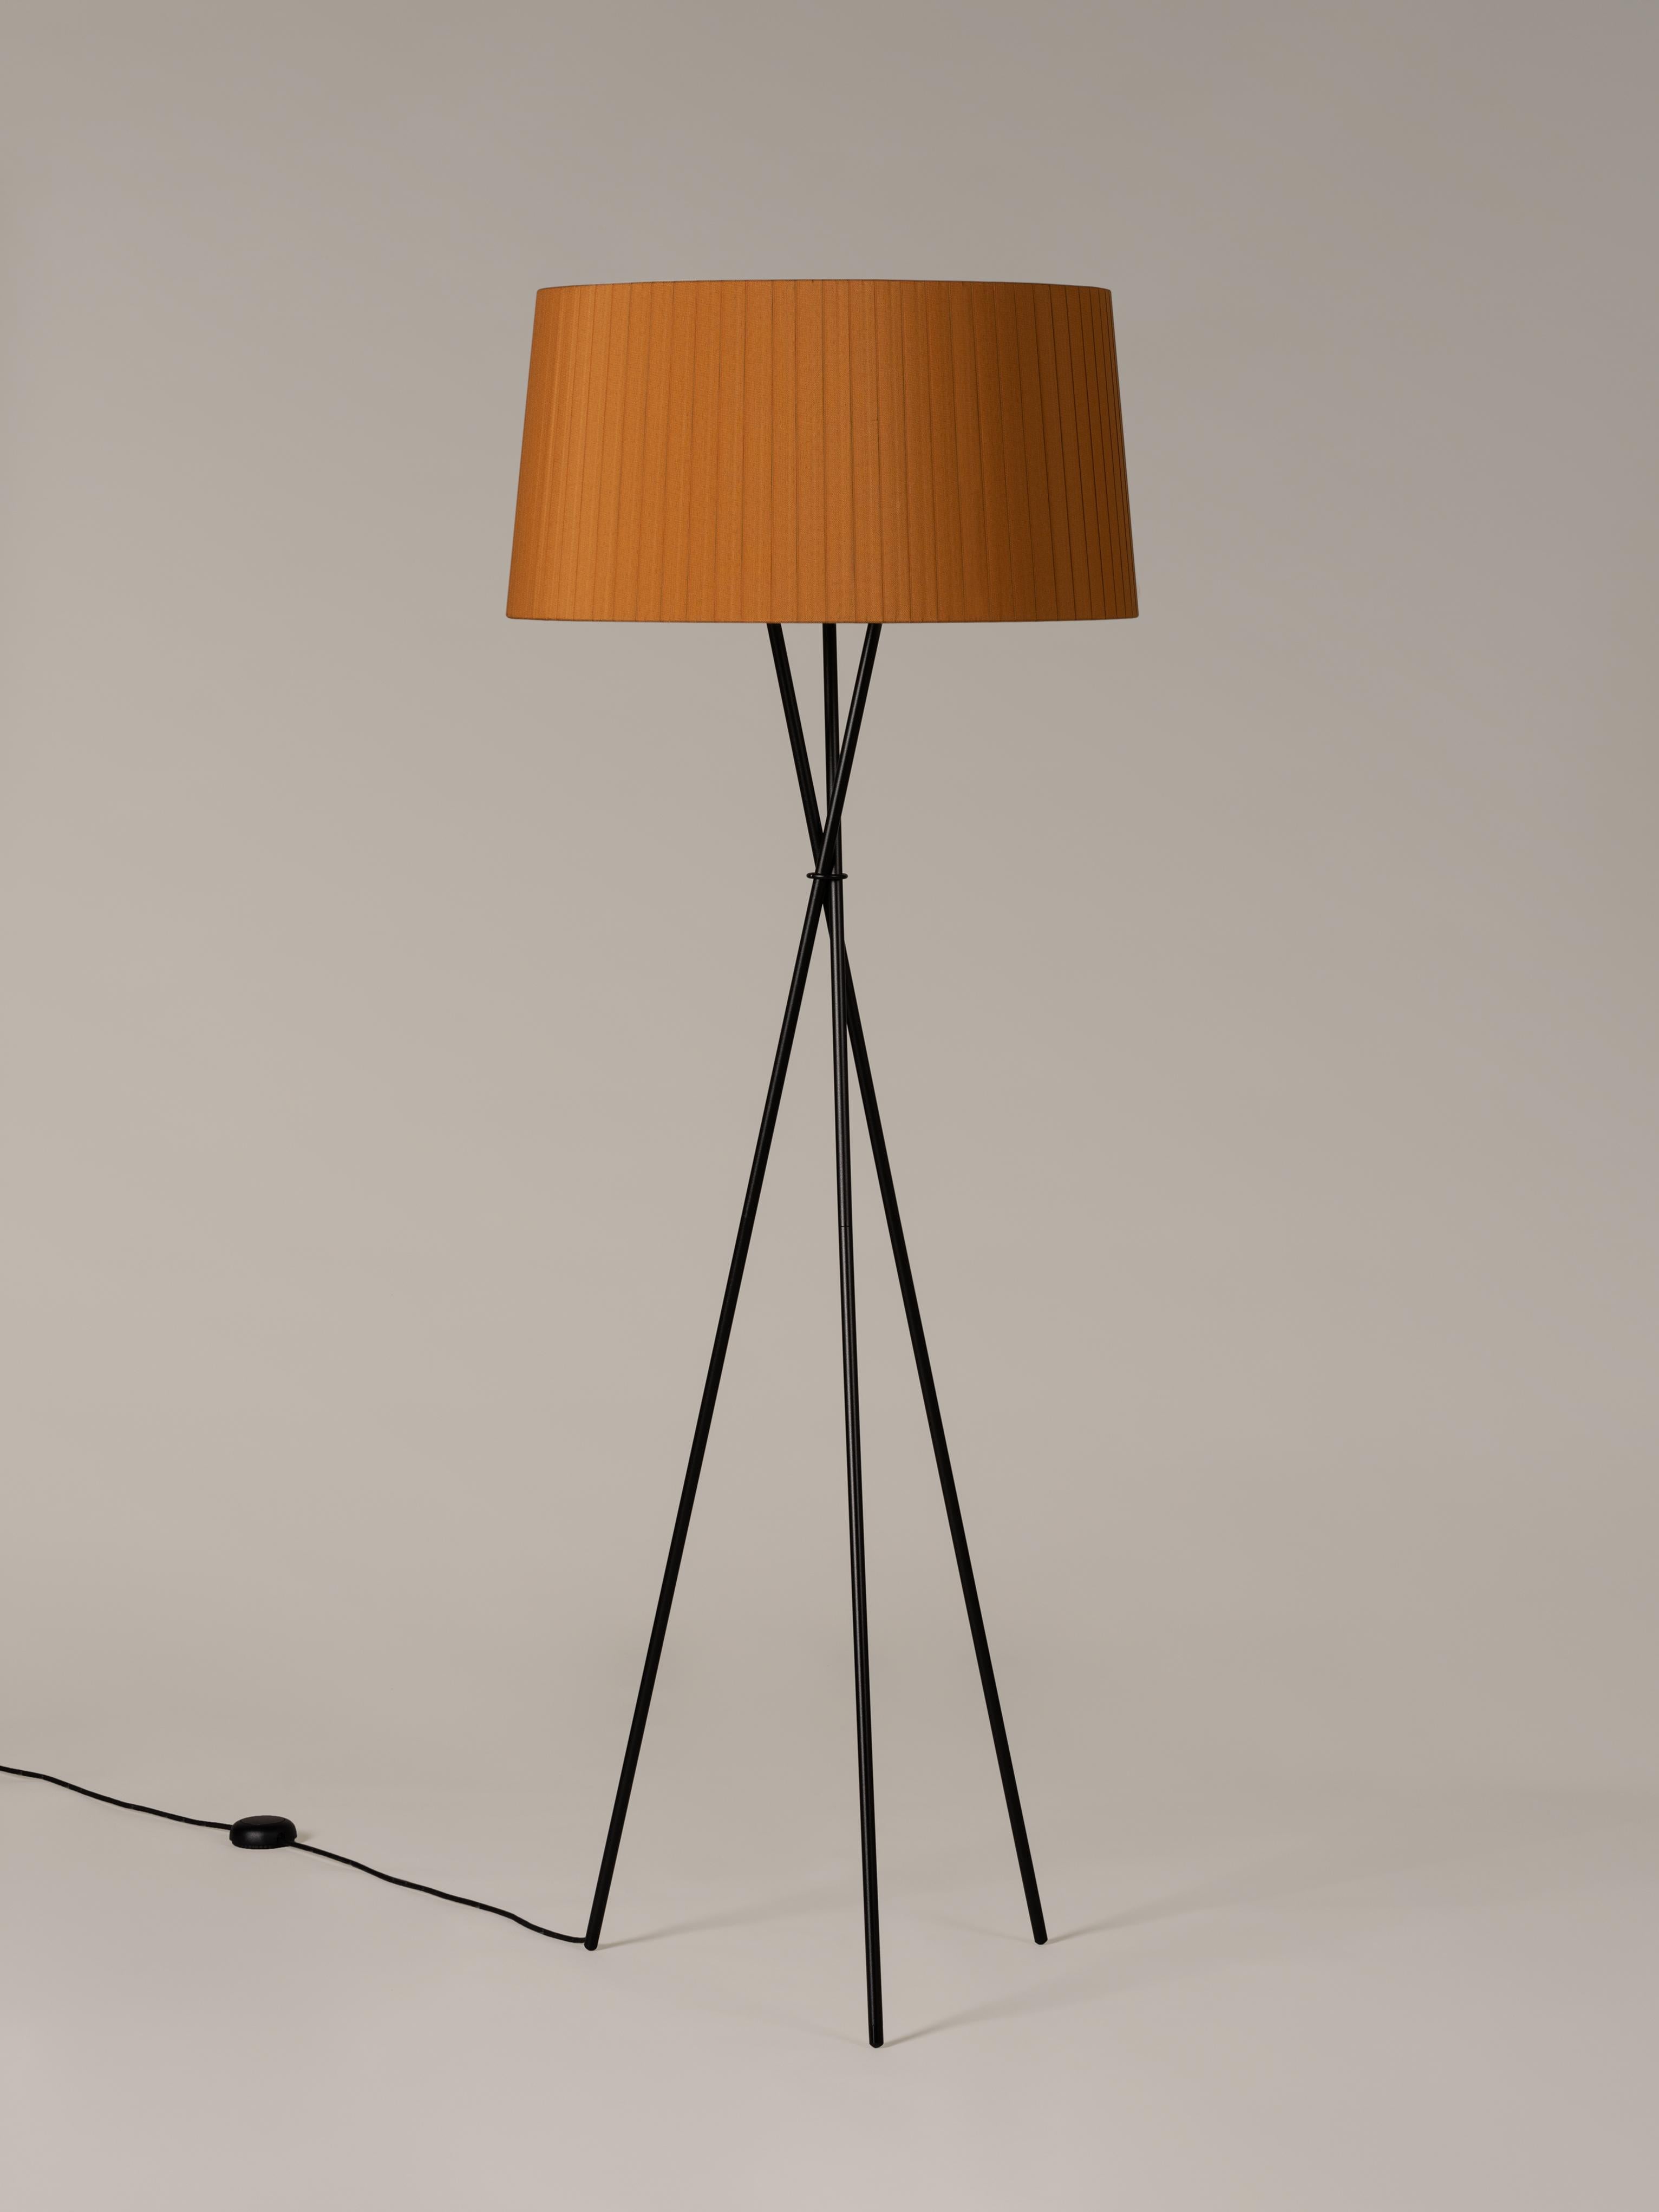 Mustard Trípode G5 floor lamp by Santa & Cole
Dimensions: D 62 x H 168 cm
Materials: Metal, ribbon.
Available in other colors.

Trípode humanises neutral spaces with its colourful and functional sobriety. The shade is hand ribboned and its base